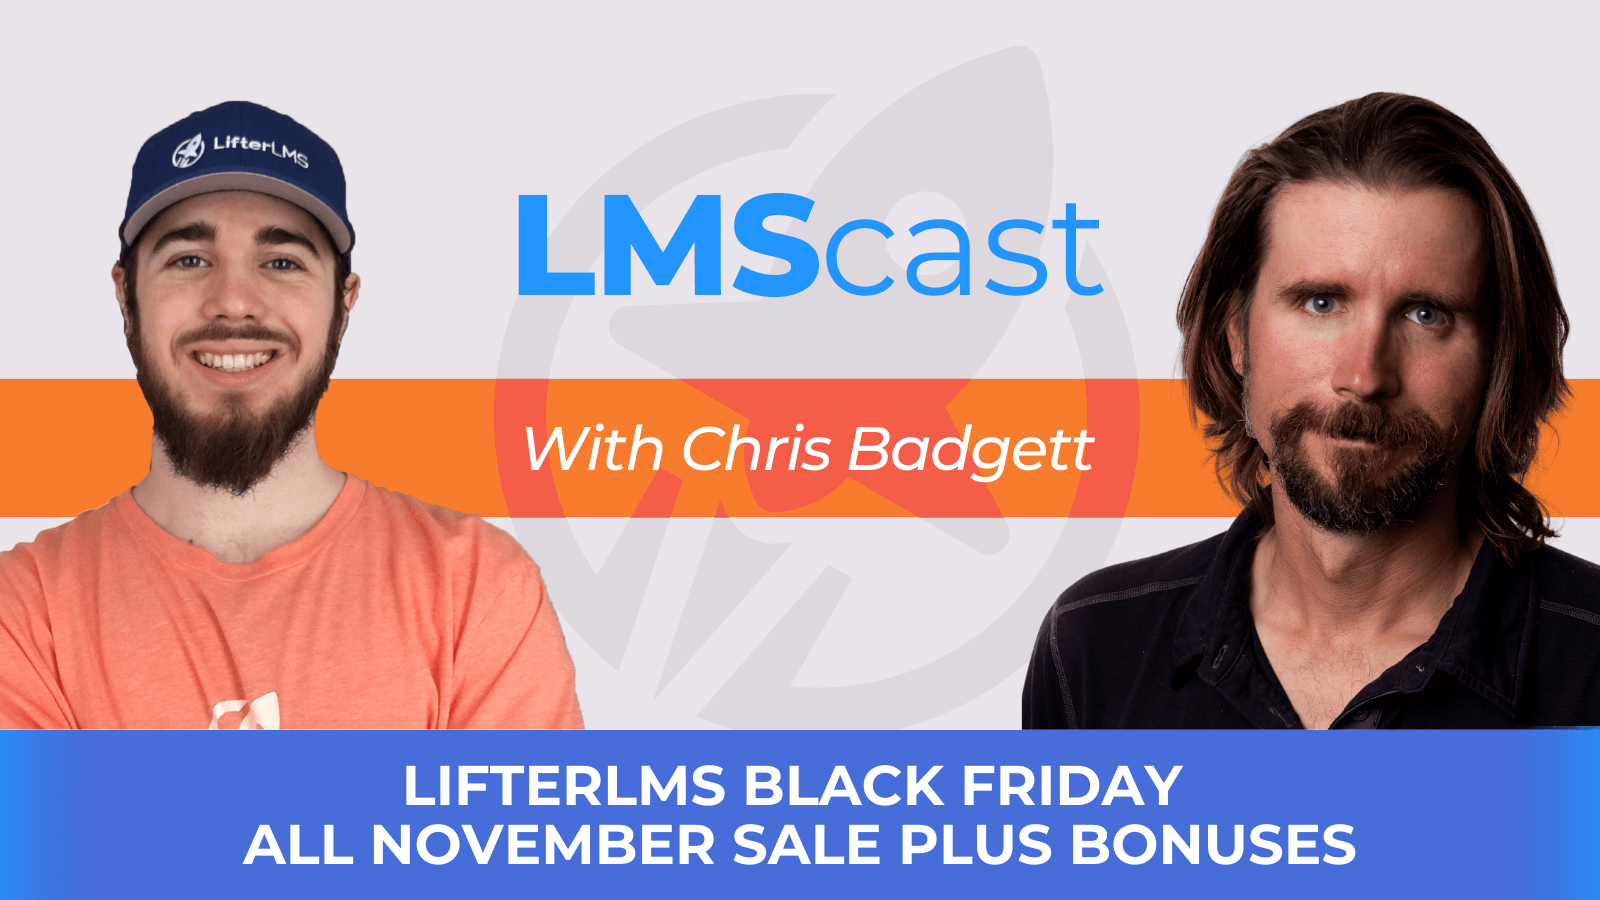 Discover the LifterLMS Black Friday All November Sale Plus Bonuses